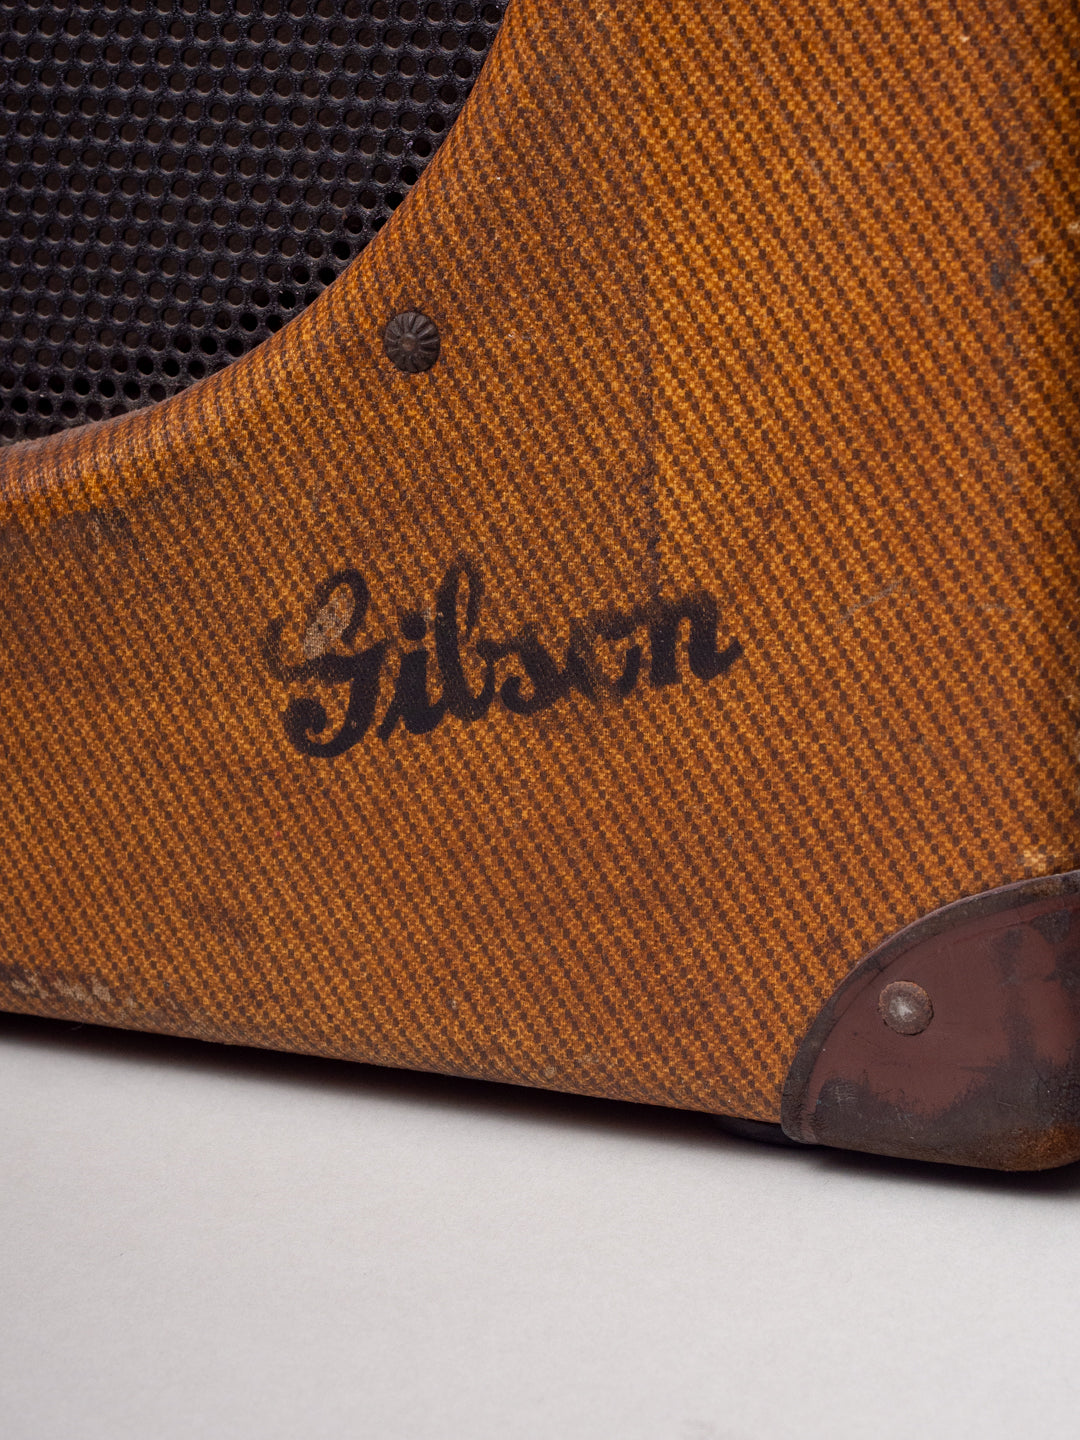 1939 Gibson EH-150